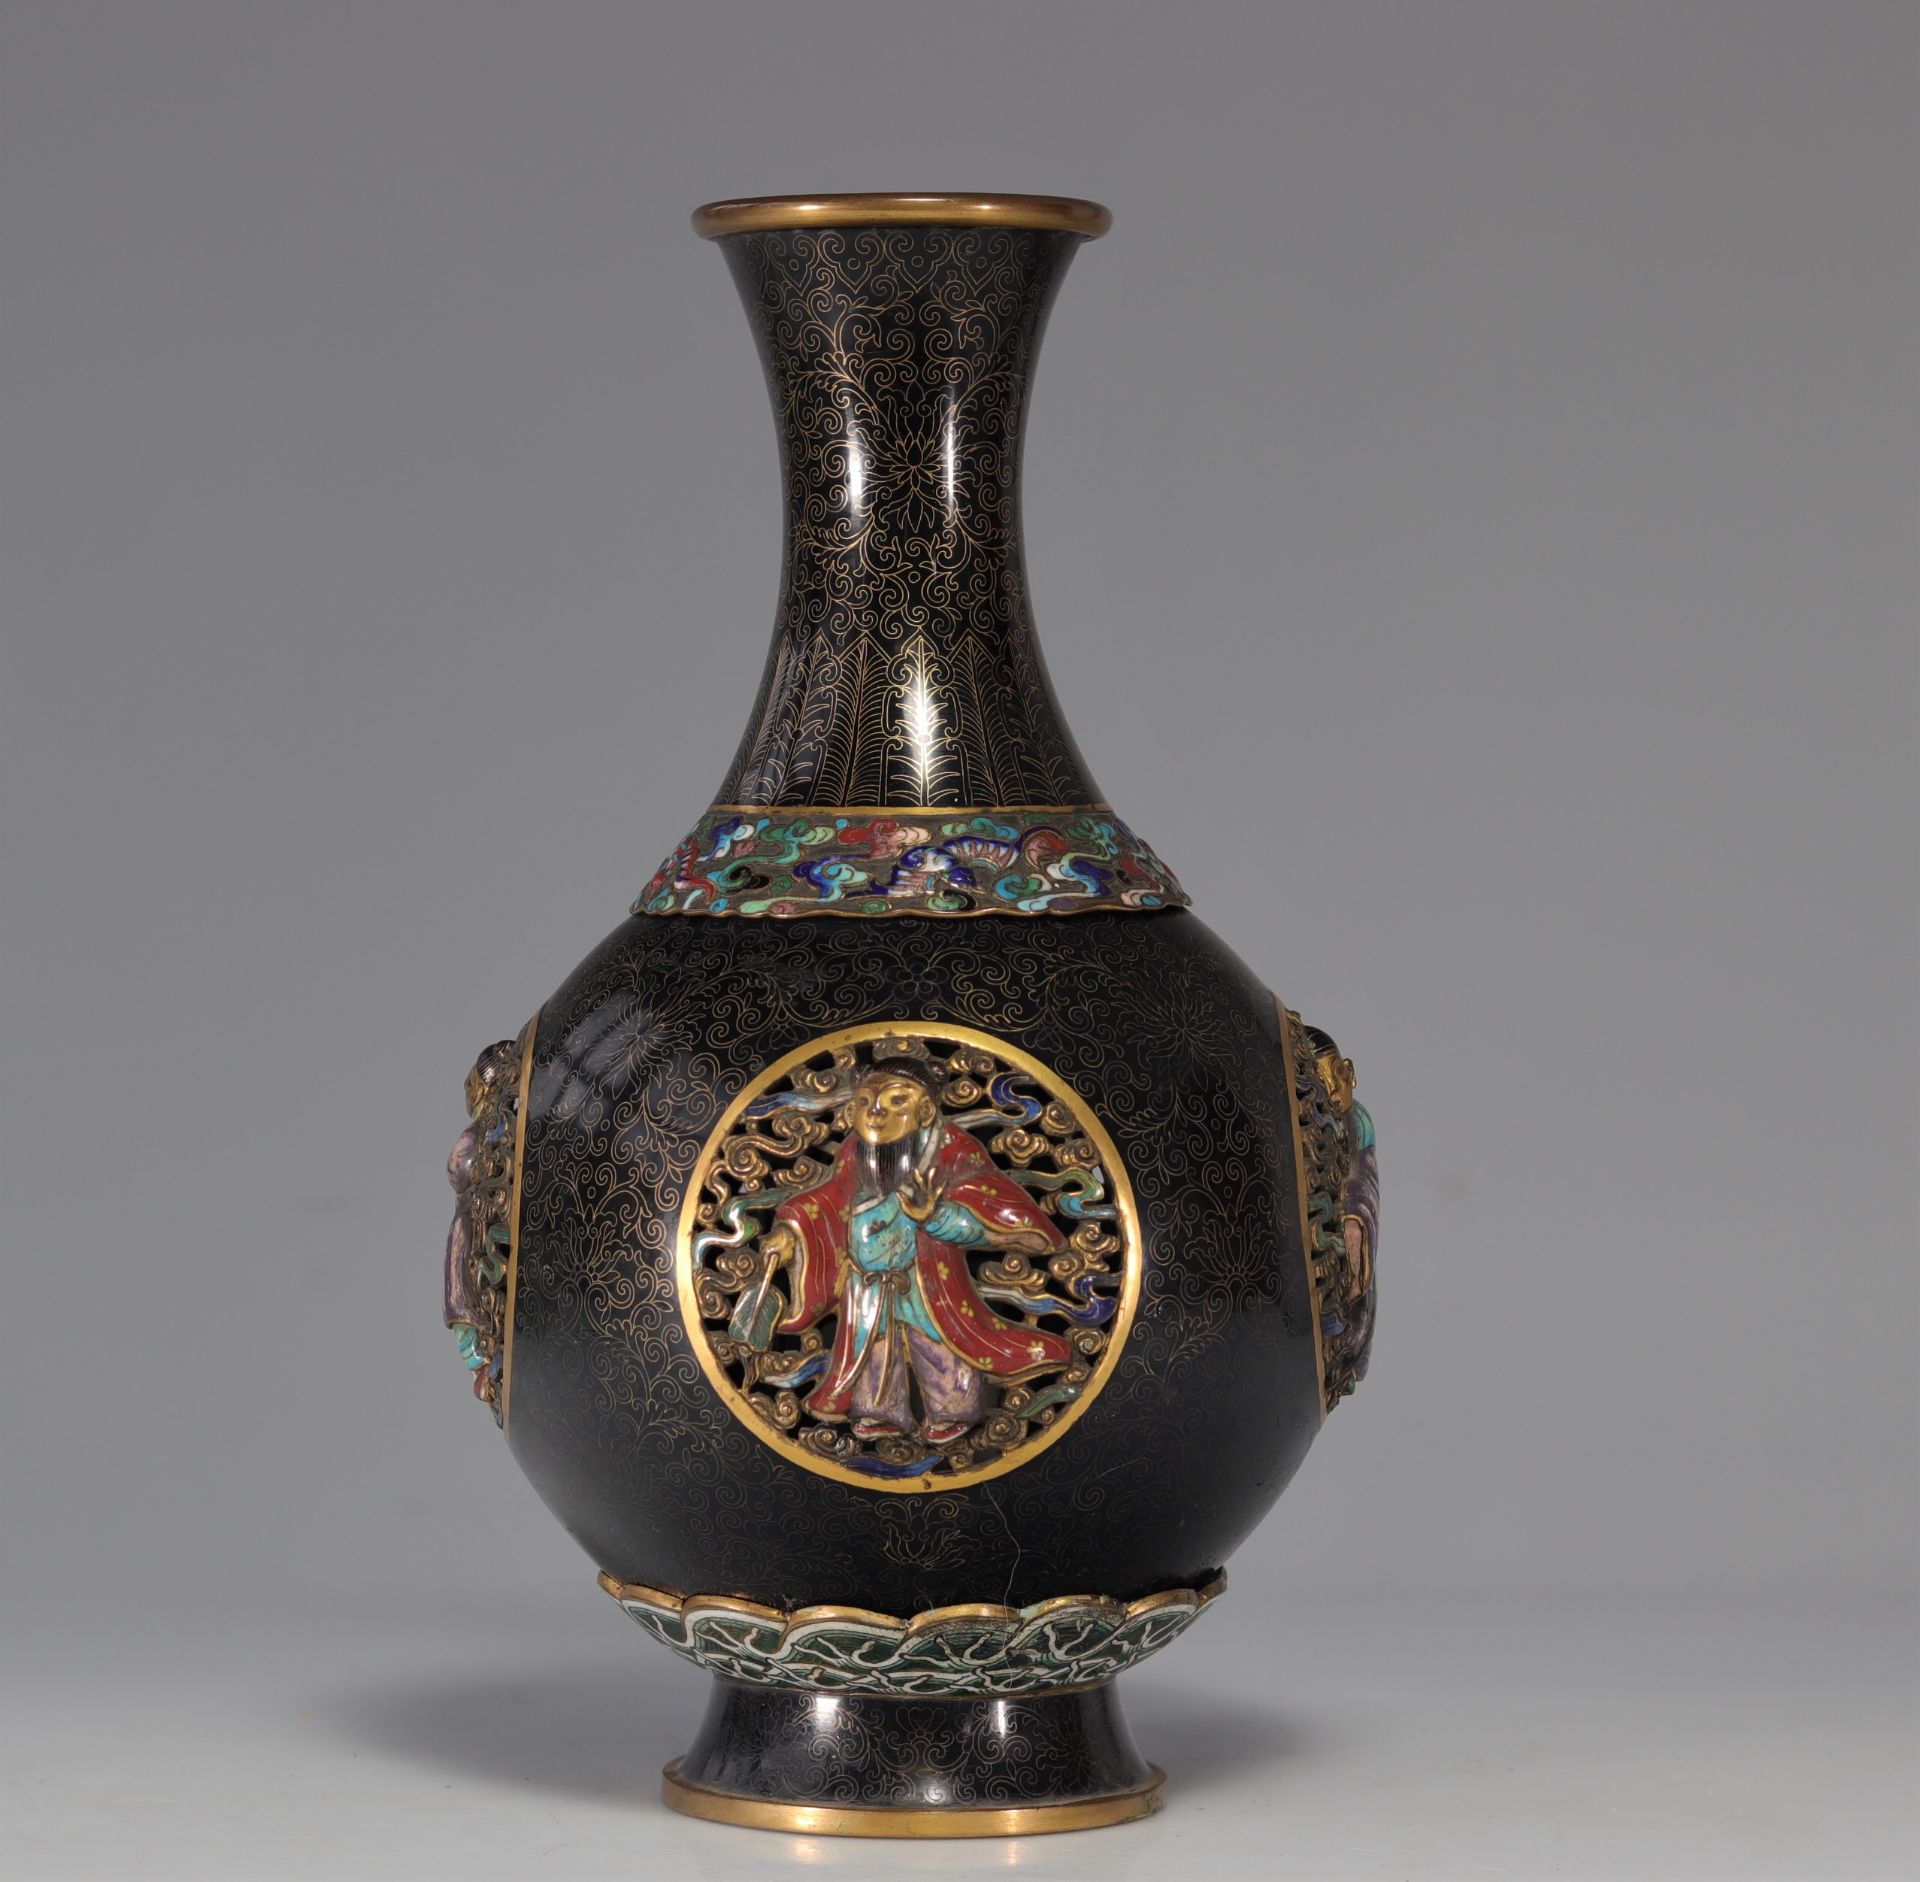 Cloisonne bronze vase decorated with Qing period figures - Image 6 of 9